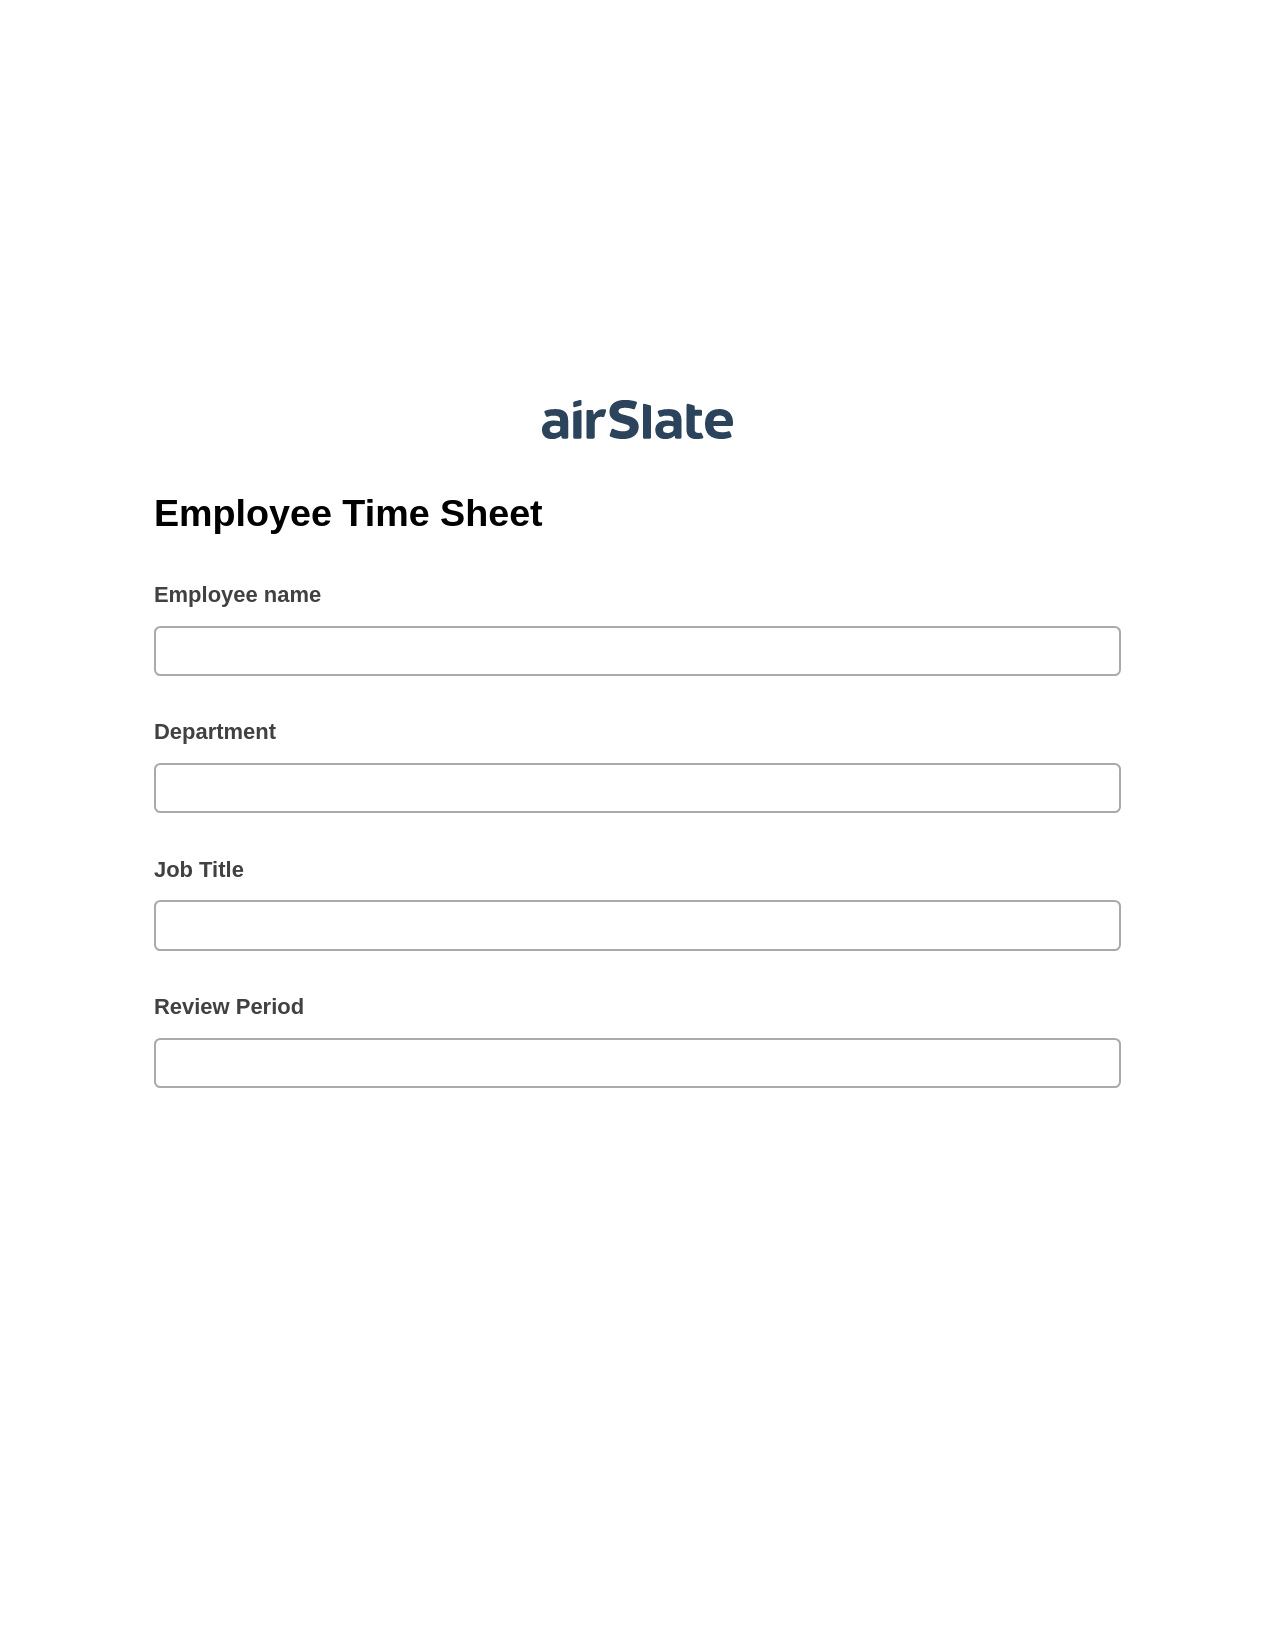 Employee Time Sheet Pre-fill Dropdowns from Excel Bot, Send a Slate to Salesforce Contact Bot, Export to Excel 365 Bot